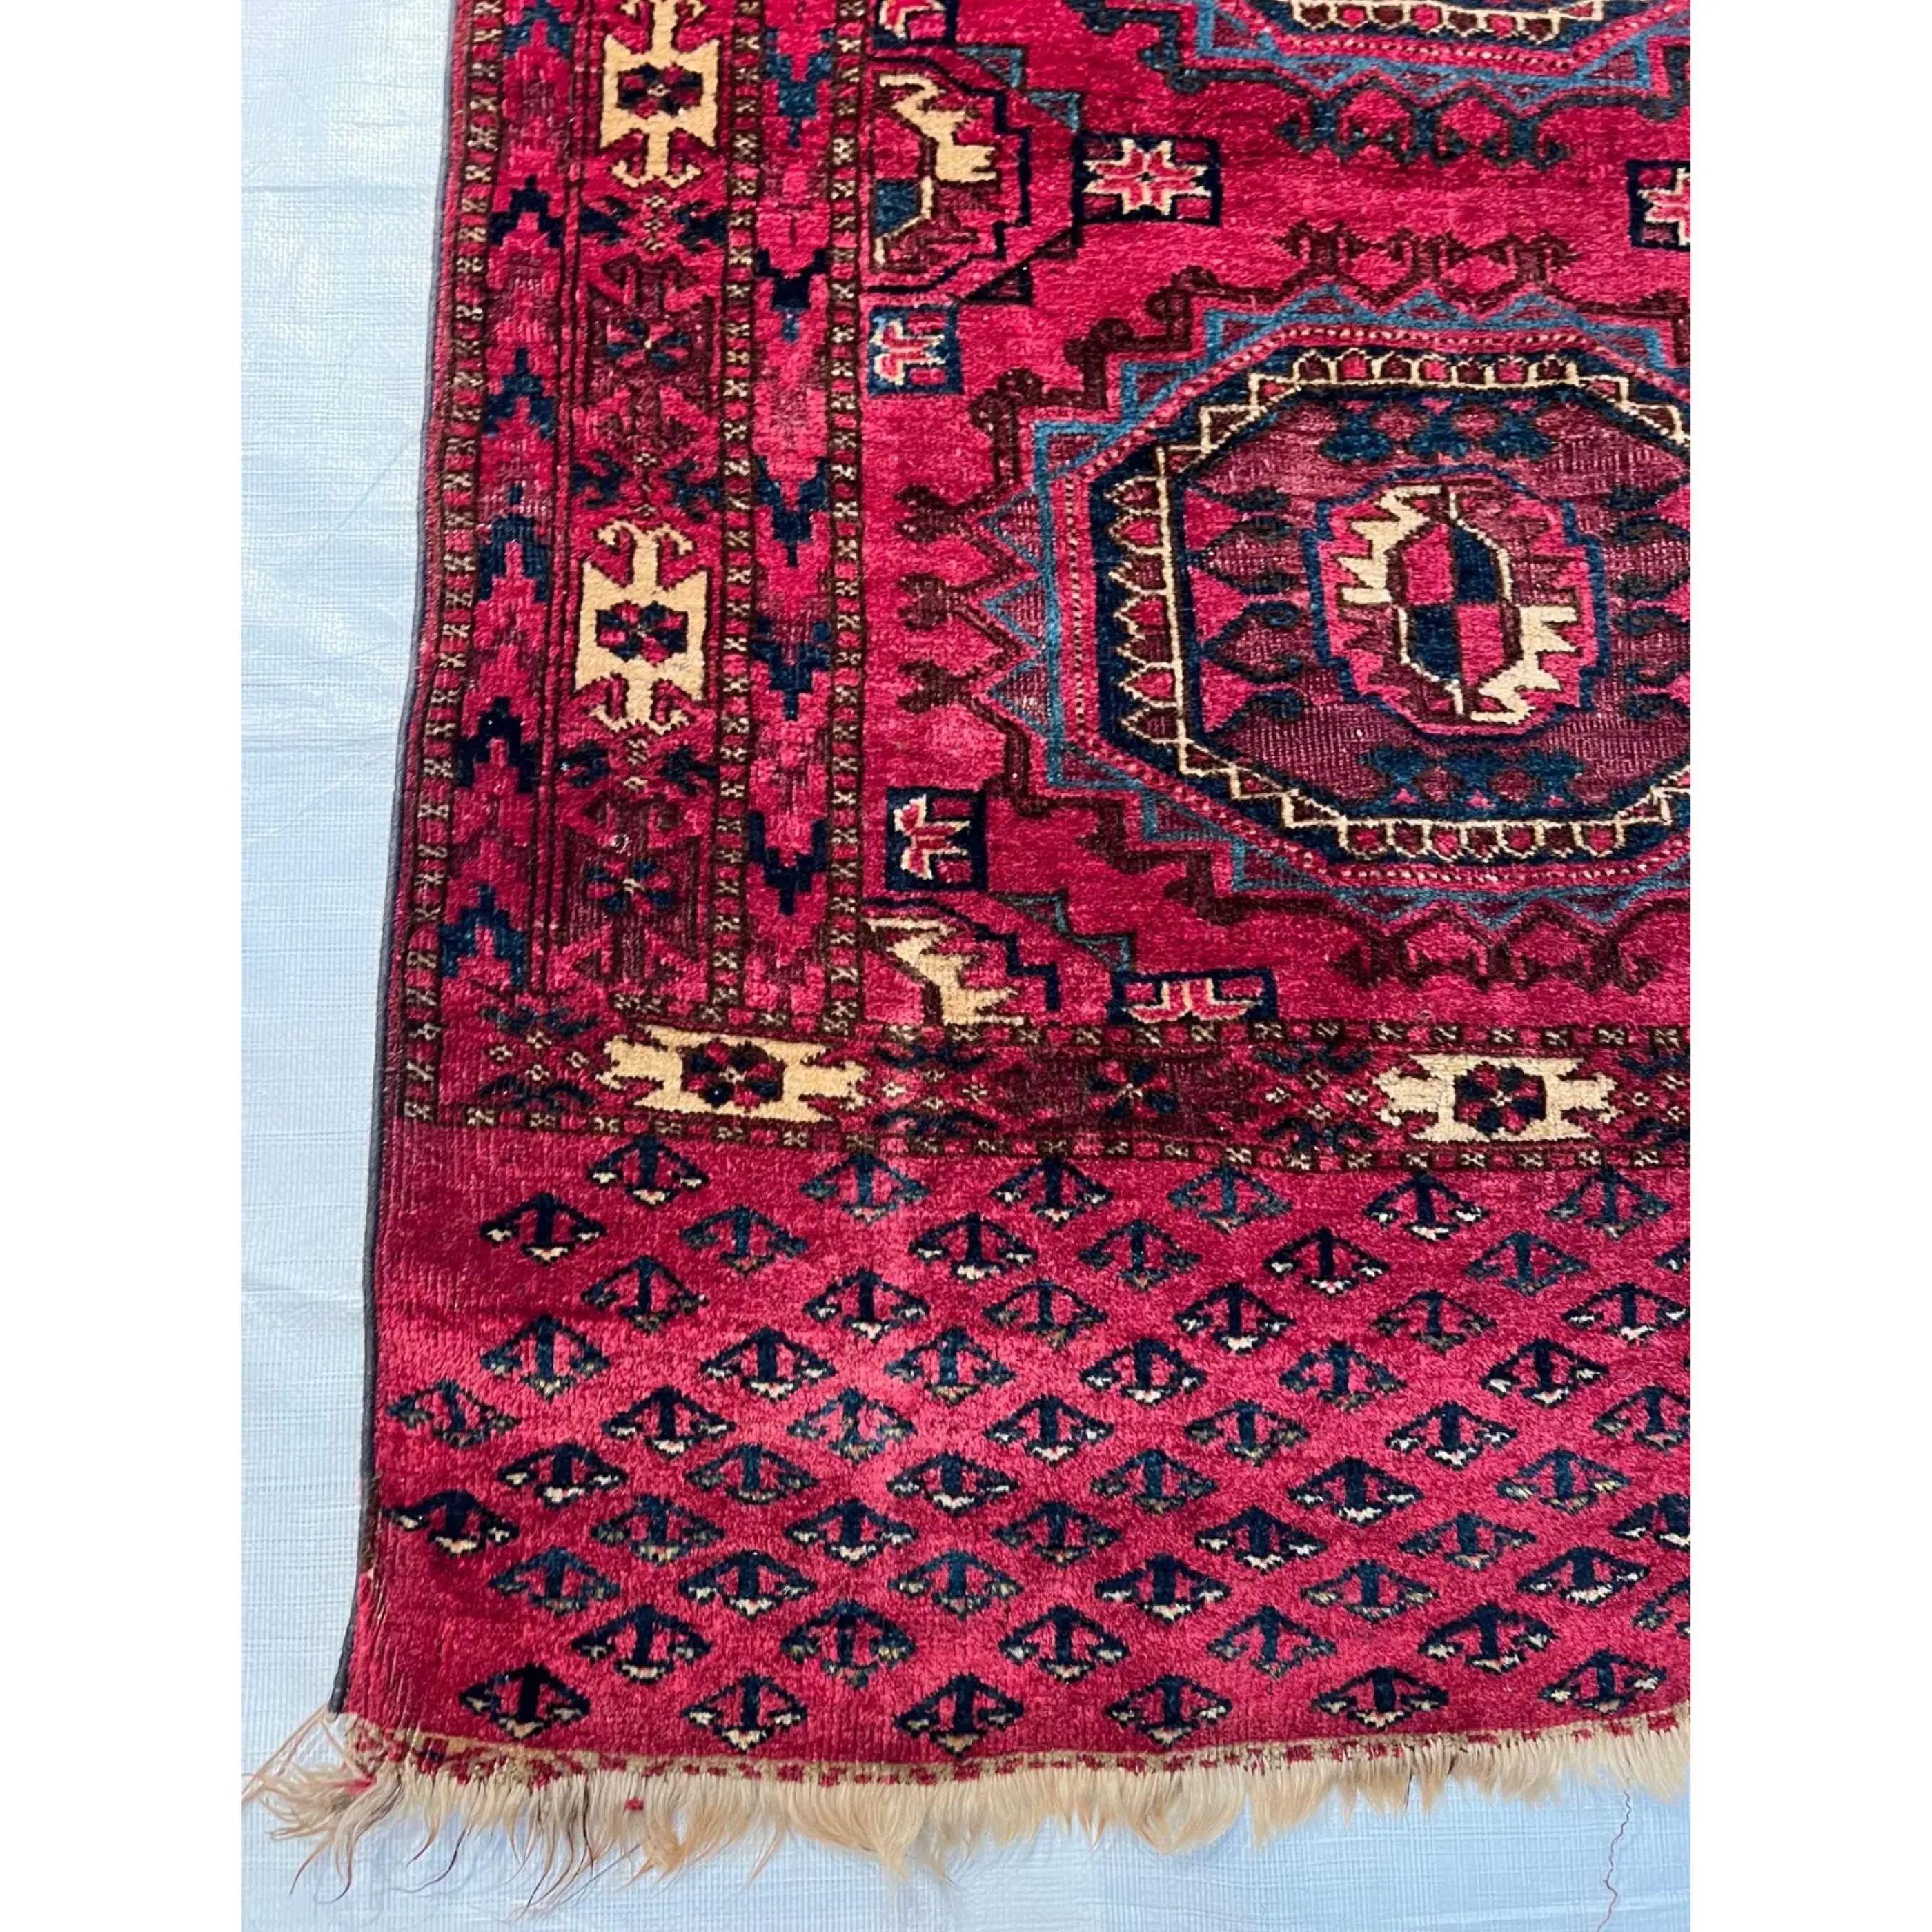 1900s Antique Salor Rug, handmade and hand-knotted tribal rug